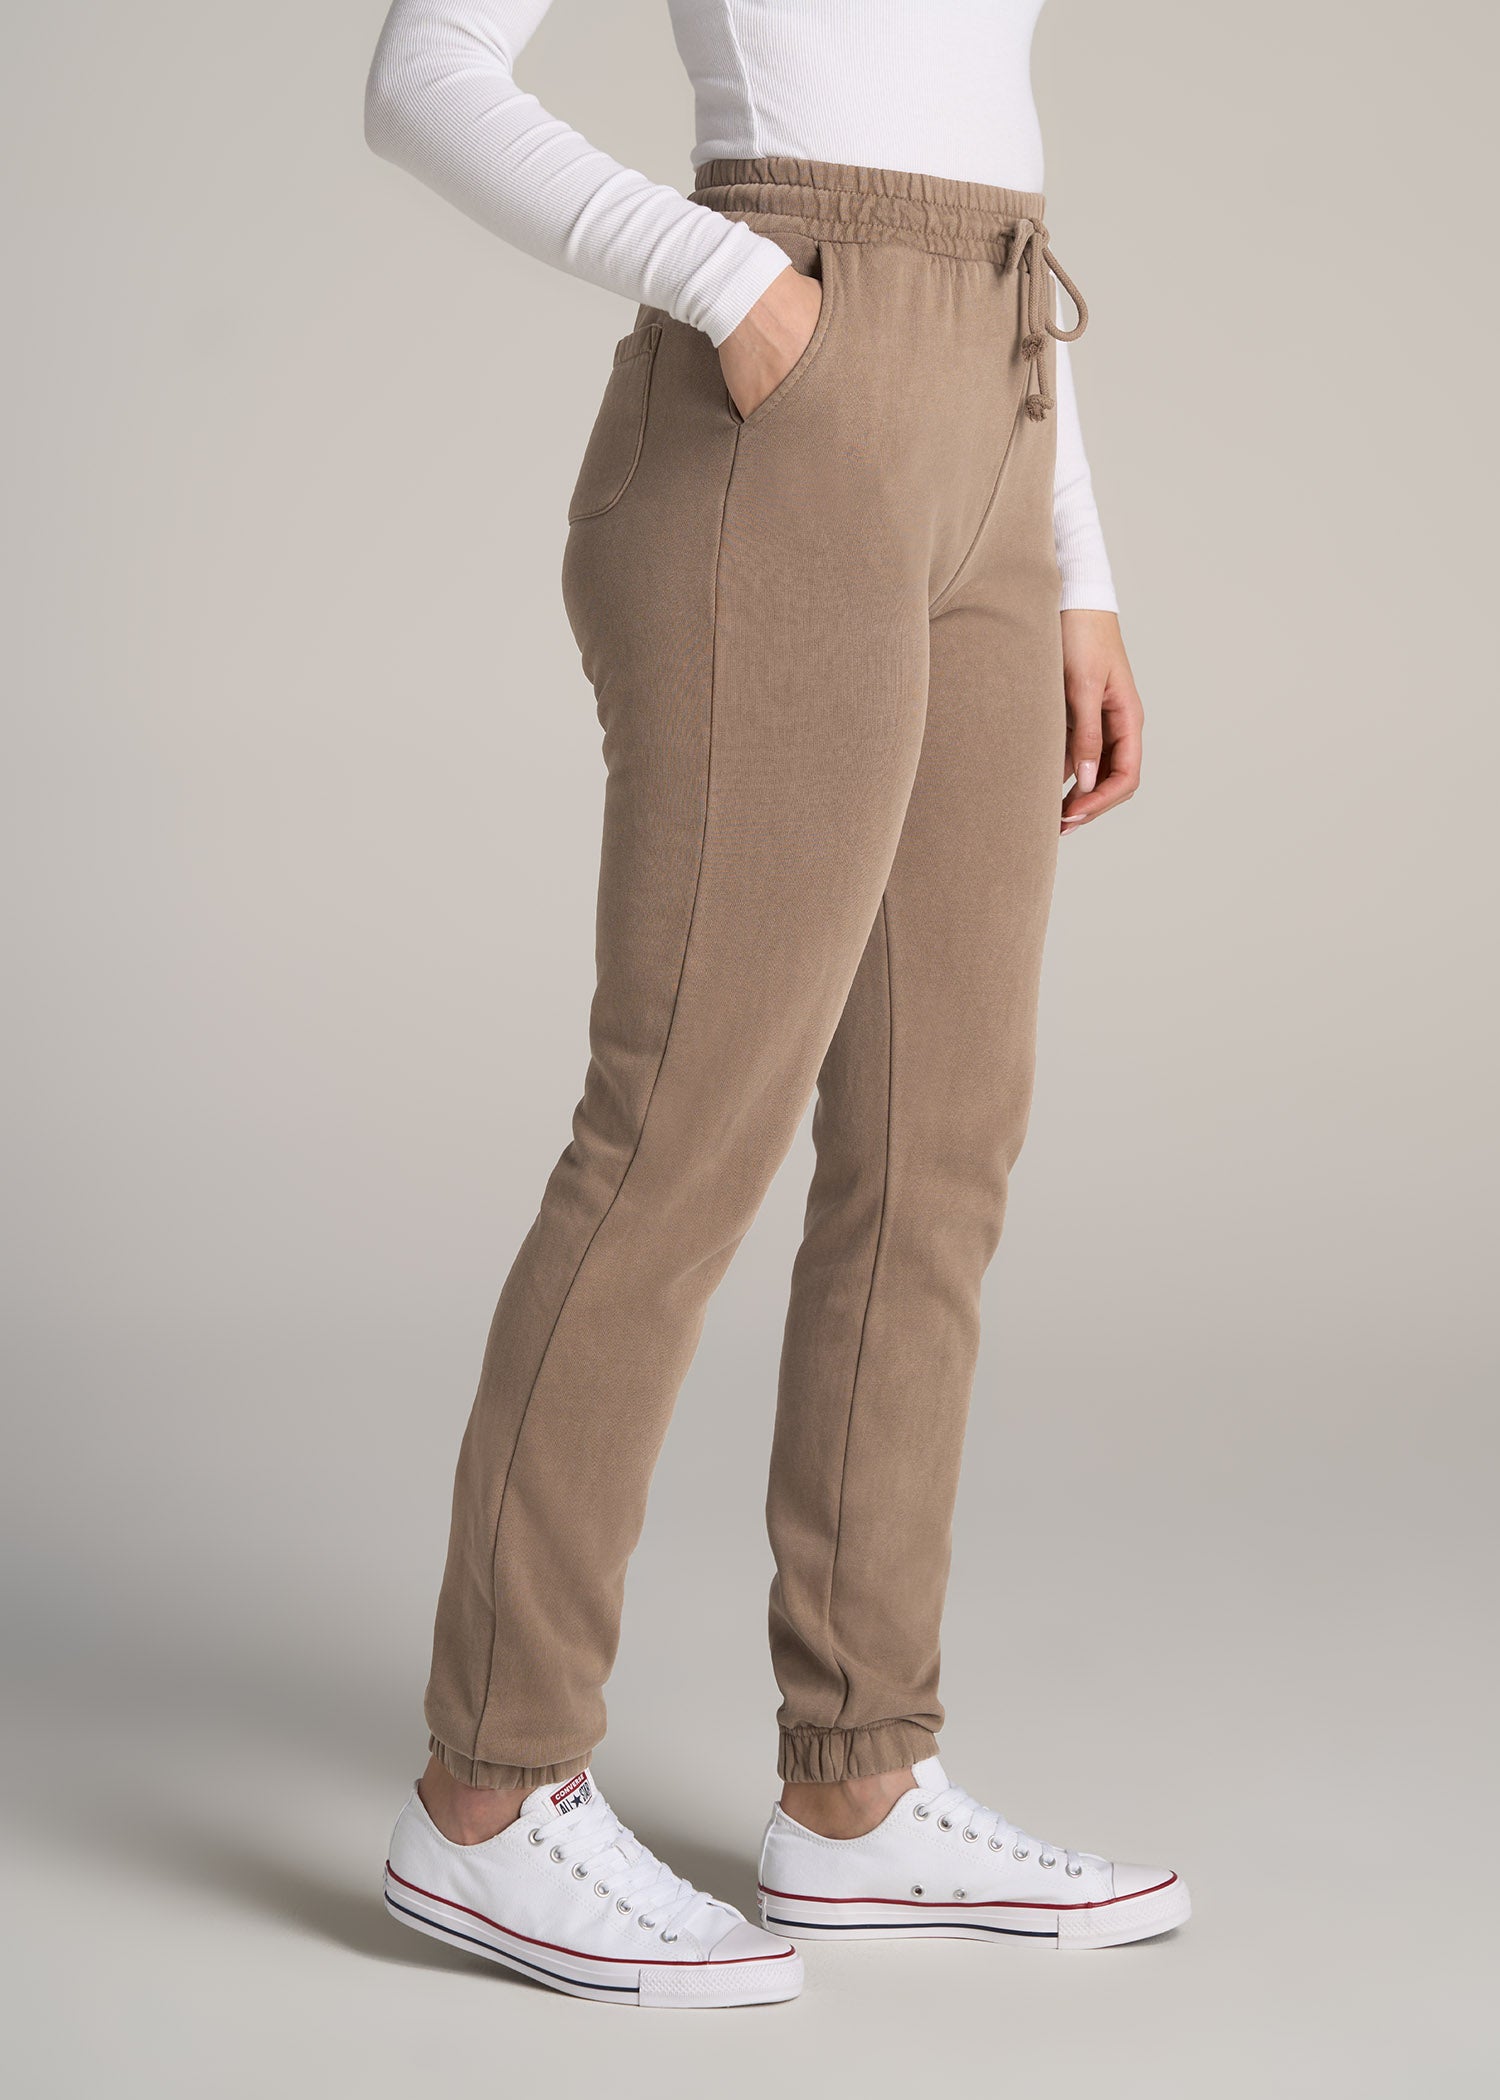 Buy Smarty Pants Women Comfort Flared High Rise Lint Free Cotton Lycra  Trousers - Trousers for Women 24261664 | Myntra